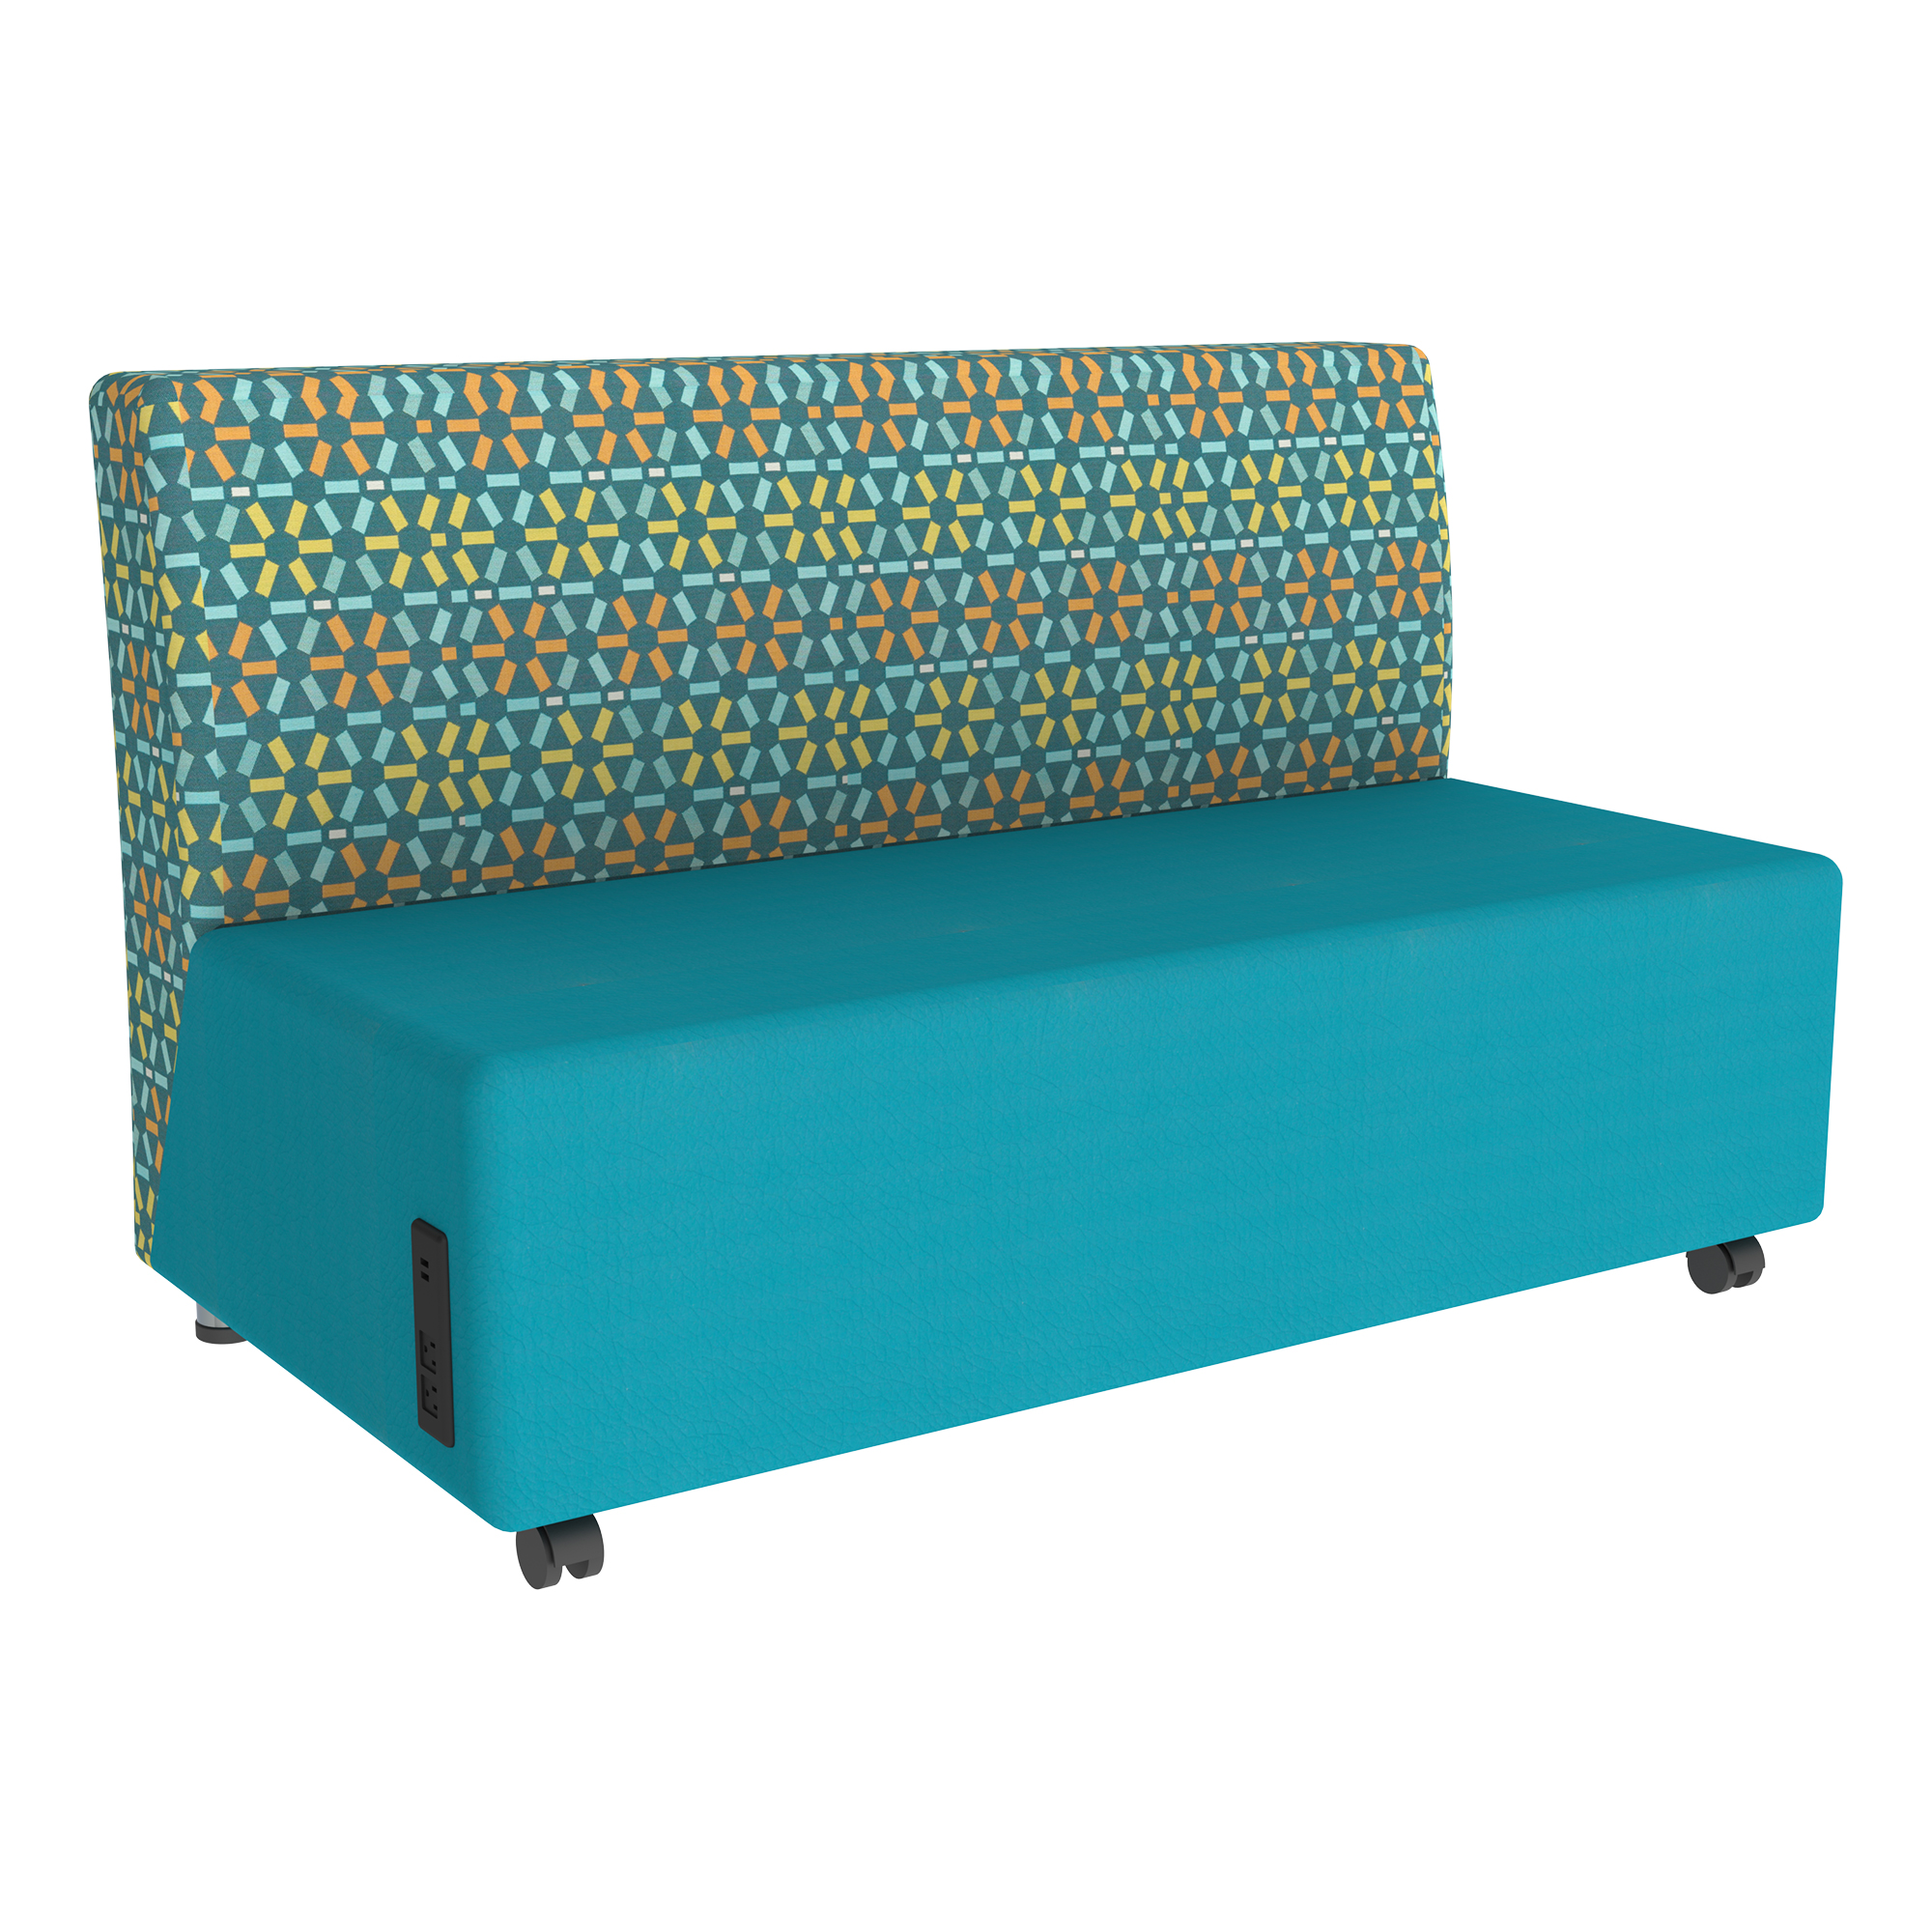 Shapes Series II Soft Seating Sofa w/ USB & Electrical Outlets at